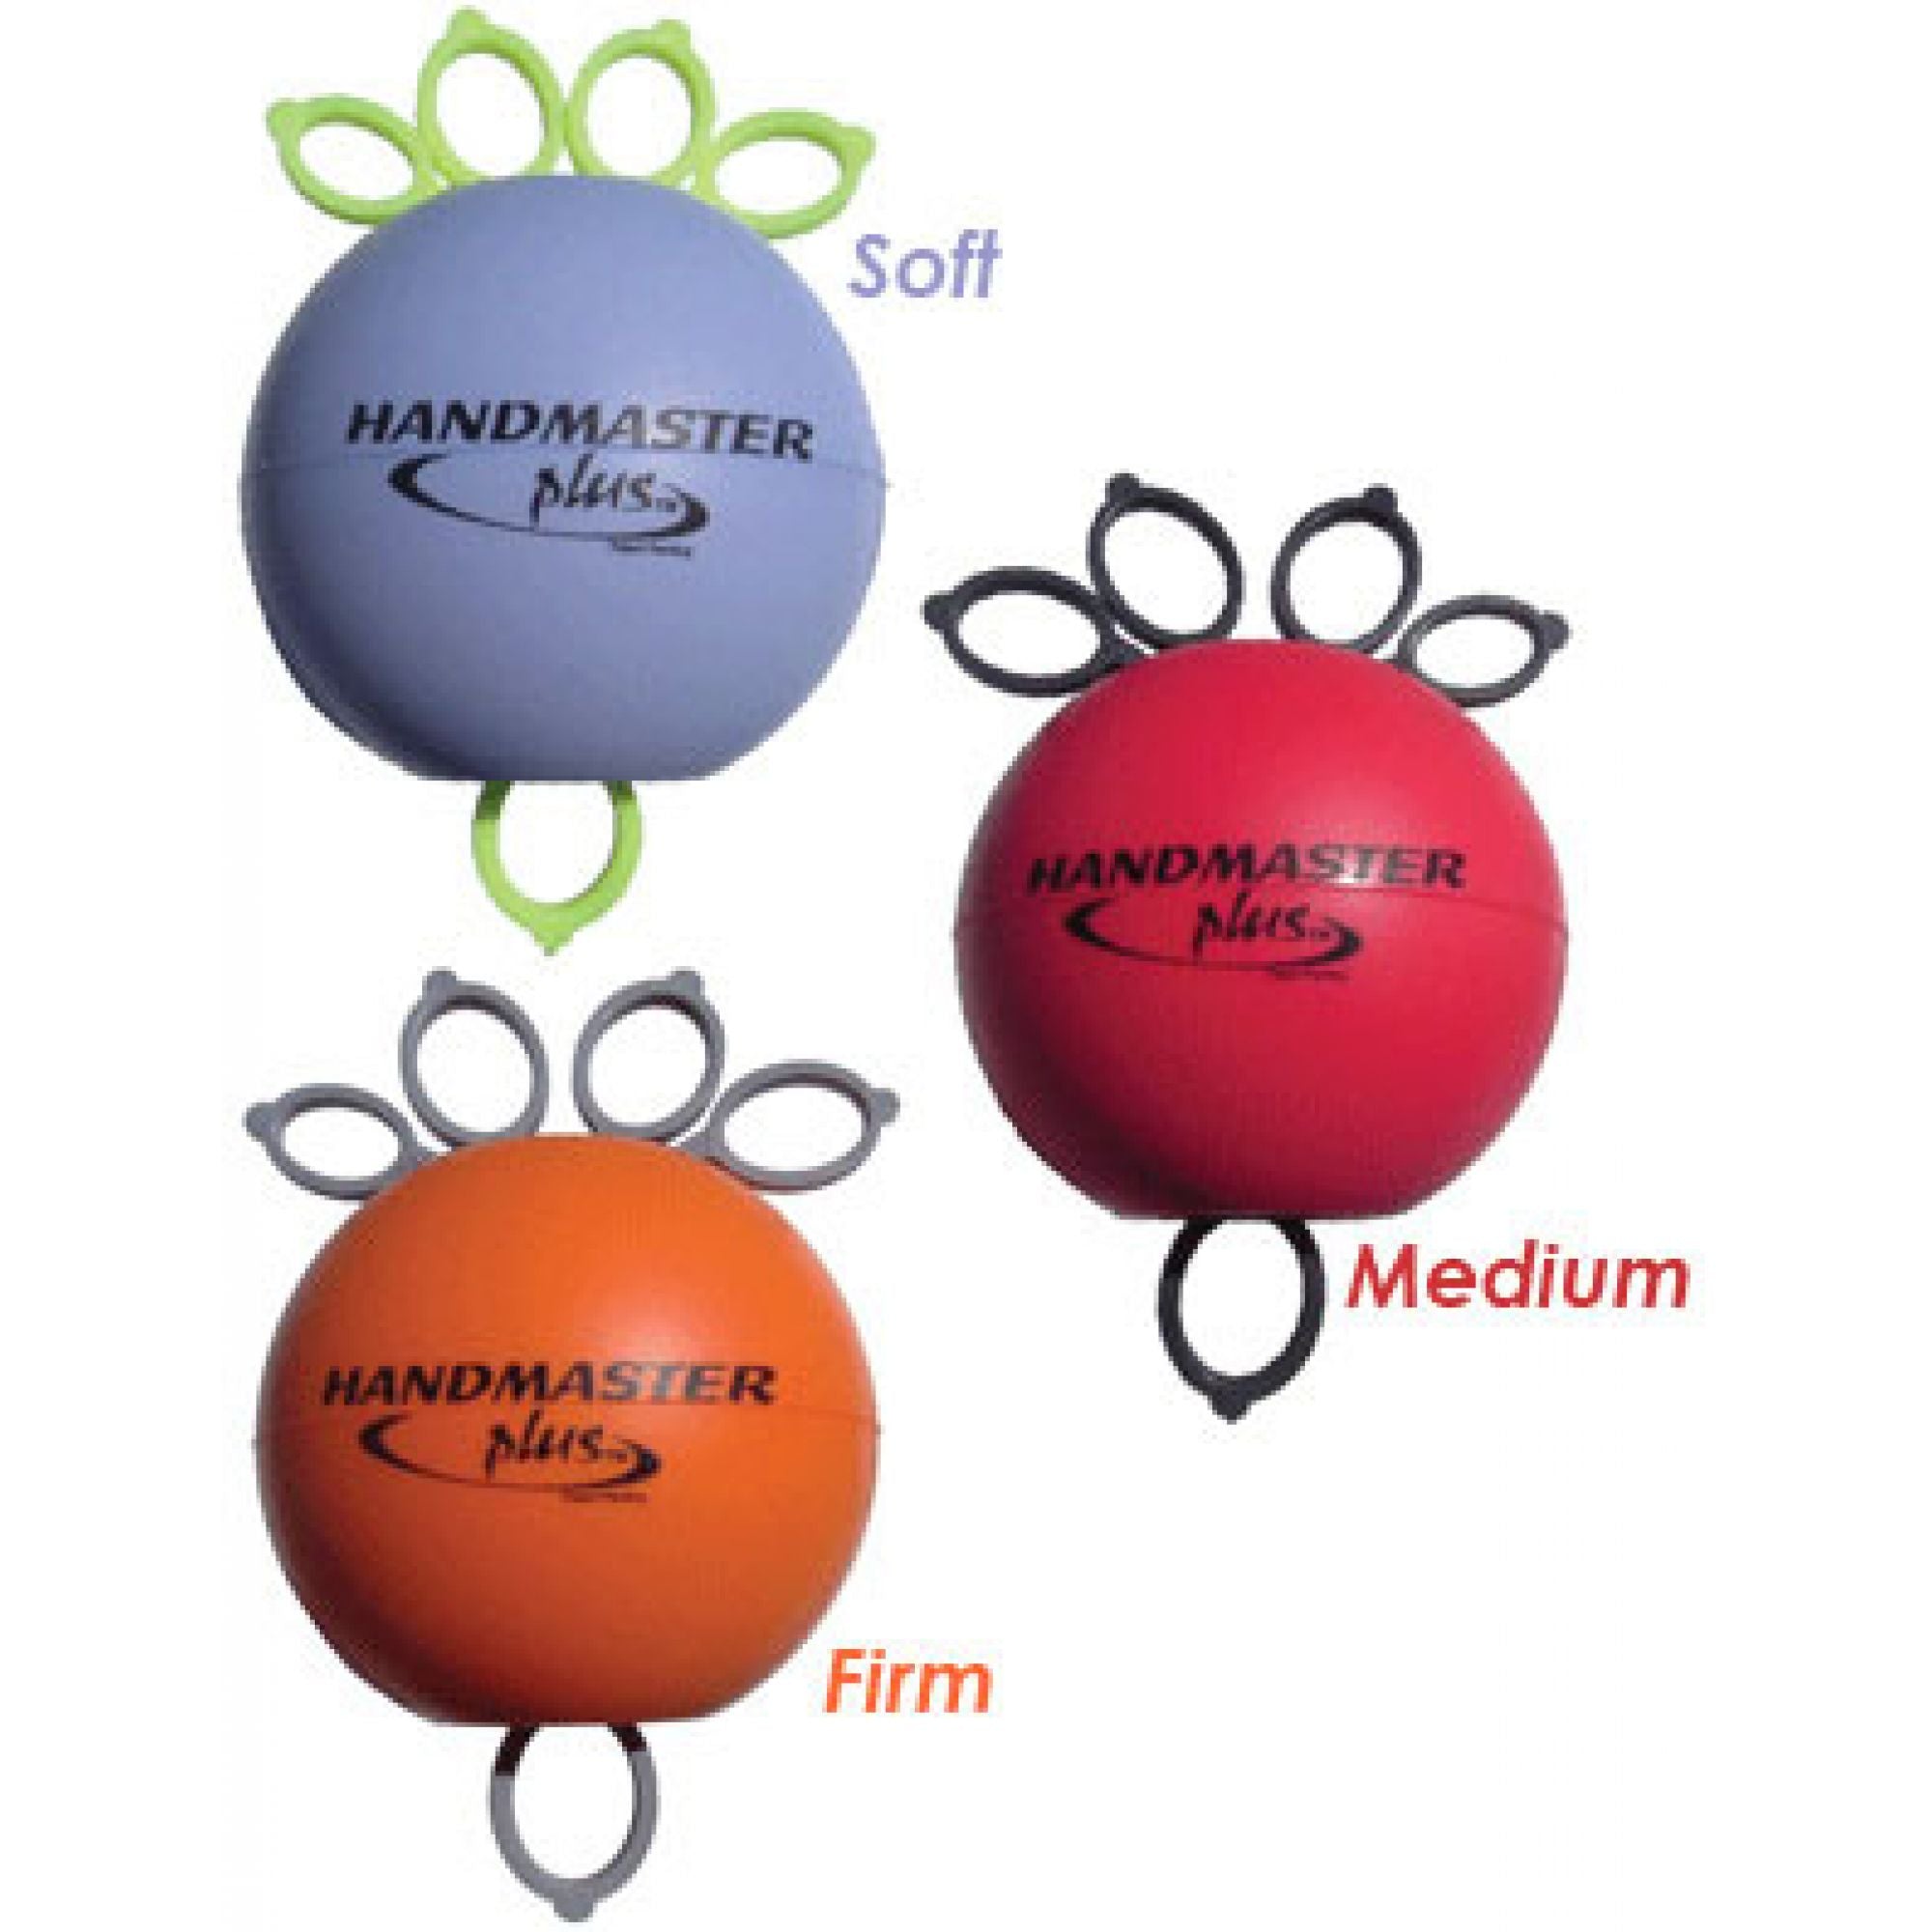 HANDMASTER PLUS 3 Pack; One Each Soft, Medium, and Firm